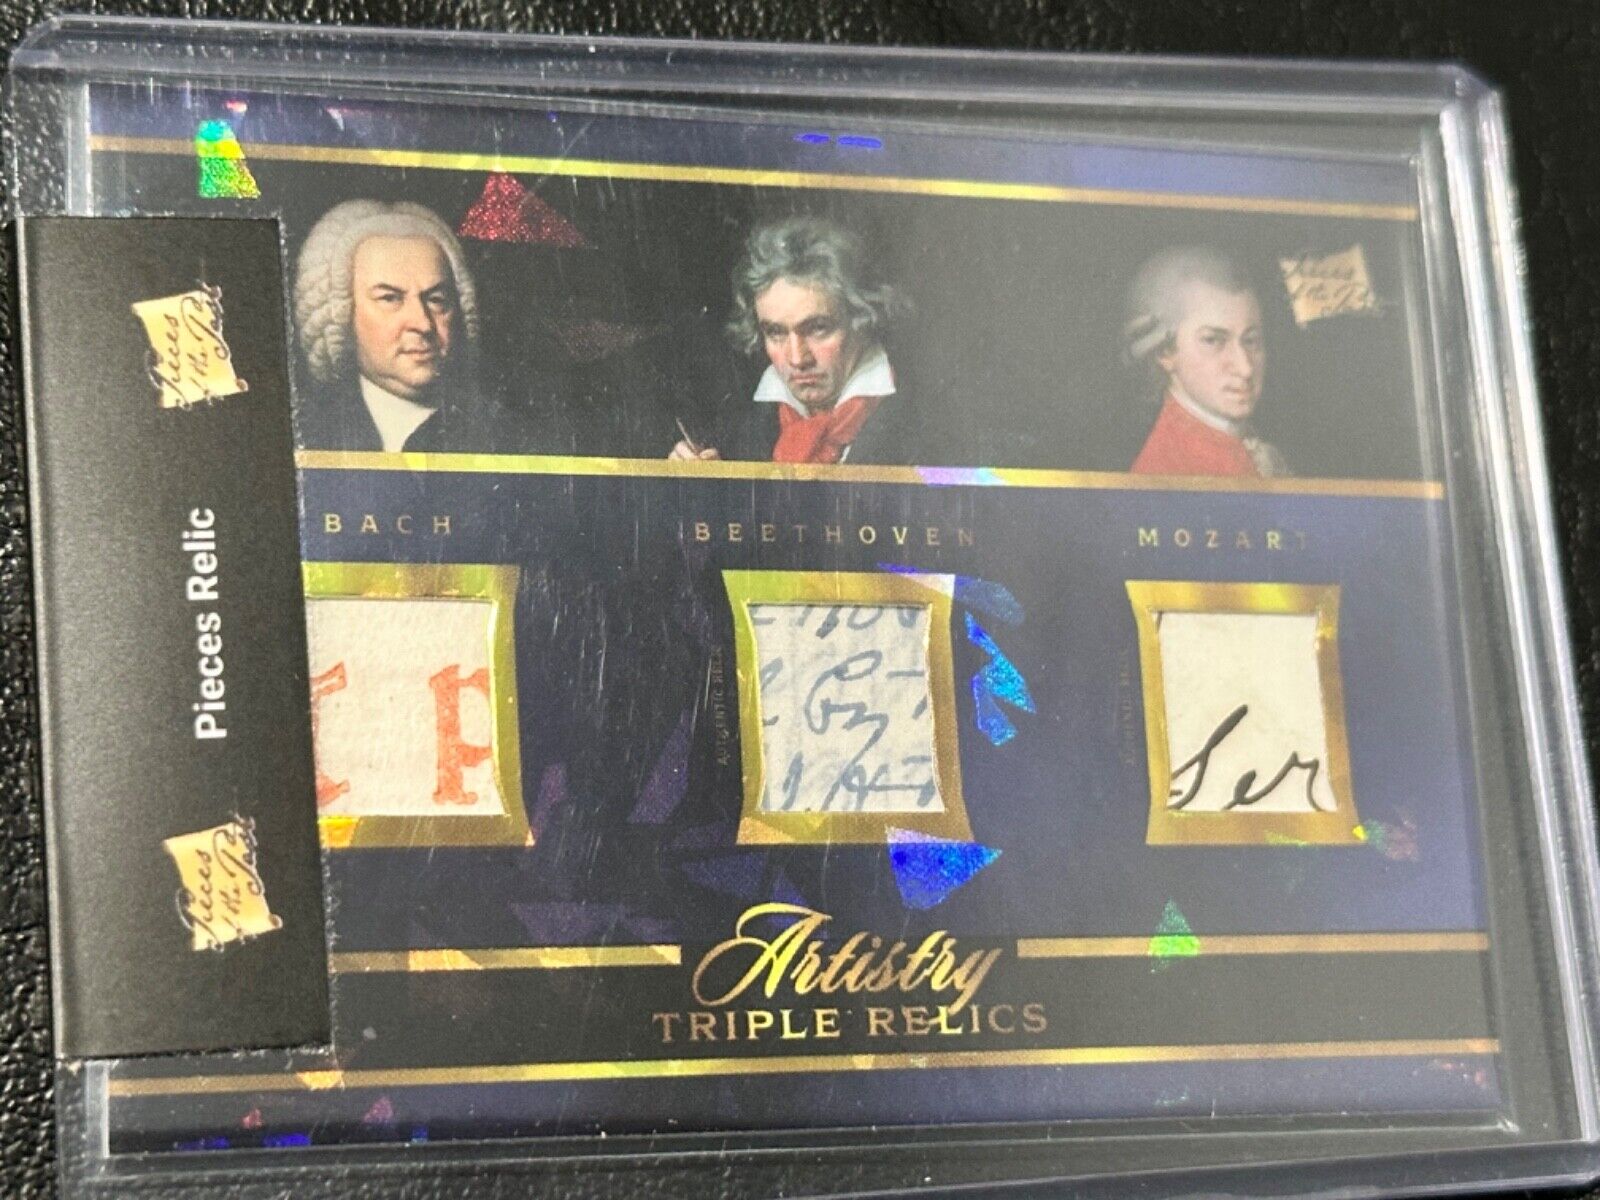 RARE - BEETHOVEN, MOZART, BACH - FAMOUS COMPOSERS - HANDWRITTEN TRIO RELIC CARD